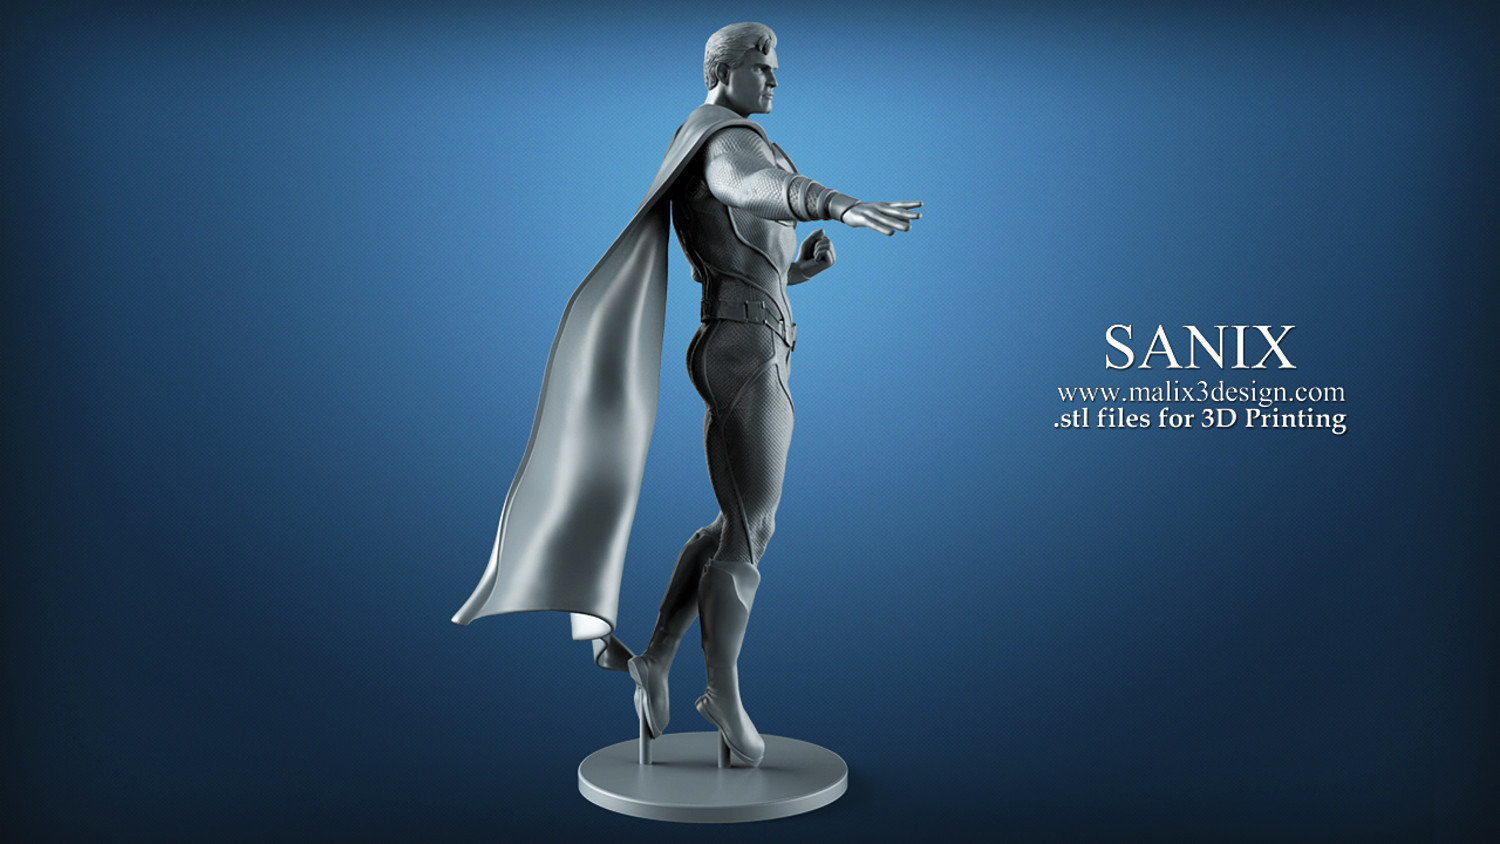 Justice League - 6 characters for 3D Printing